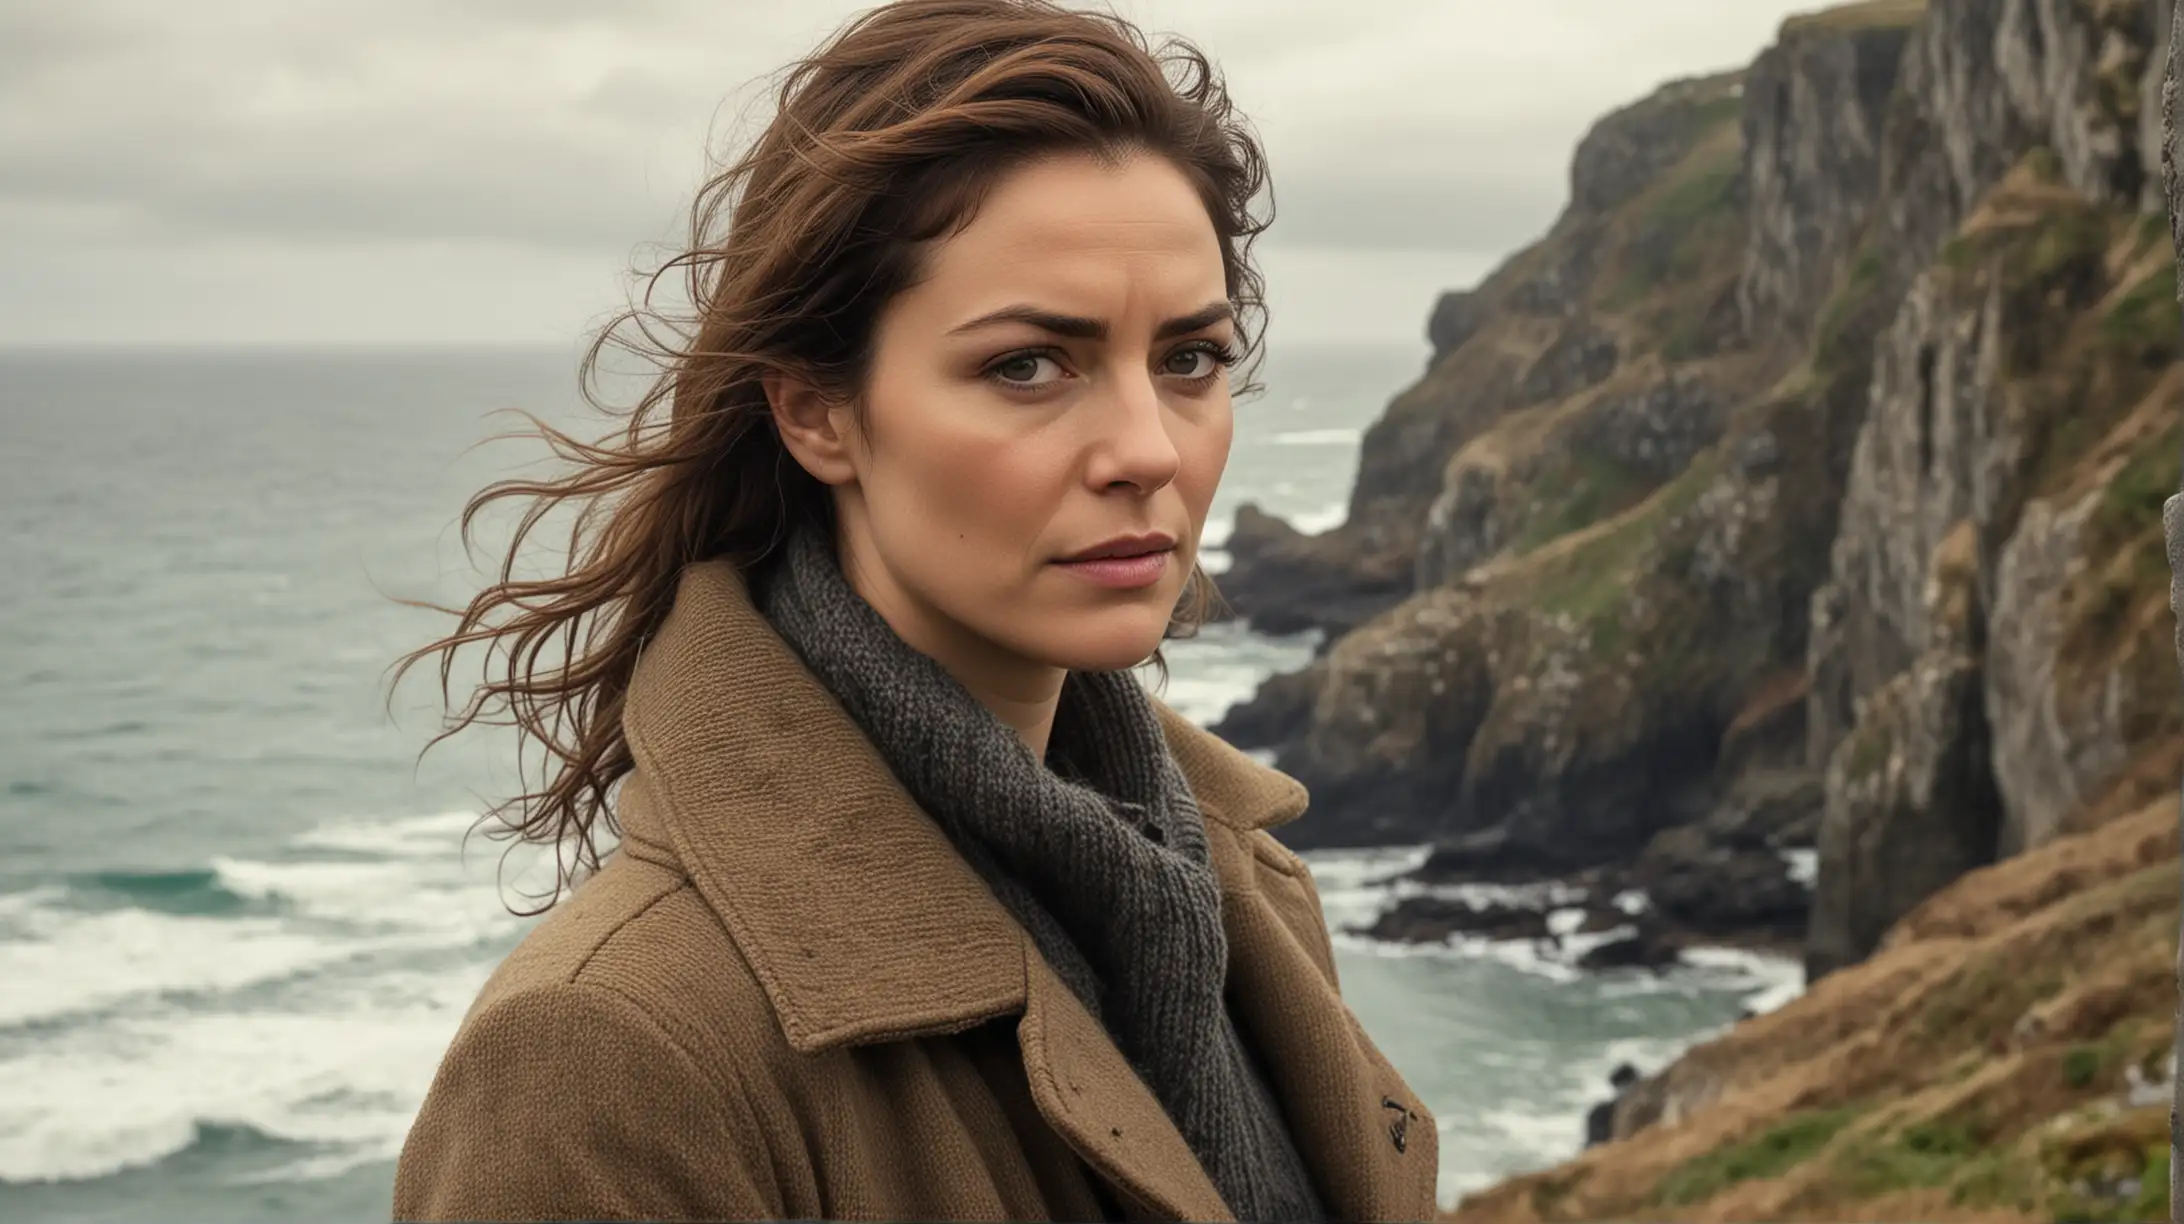 The second image needs to focus on Cora herself – a determined, resilient detective with a complex past. She is in her late thirties, with sharp features, keen eyes that have seen too much, and hair that's often windswept from her outdoor investigations. Cora is depicted standing at the edge of a cliff overlooking the sea, symbolizing her return to her roots and the emotional and professional precipices she faces. Her expression is one of resolve mixed with a hint of sorrow. She's dressed in practical detective attire that blends with the landscape – think rugged boots, whoolsweater , and layers suitable for the unpredictable Scottish weather.